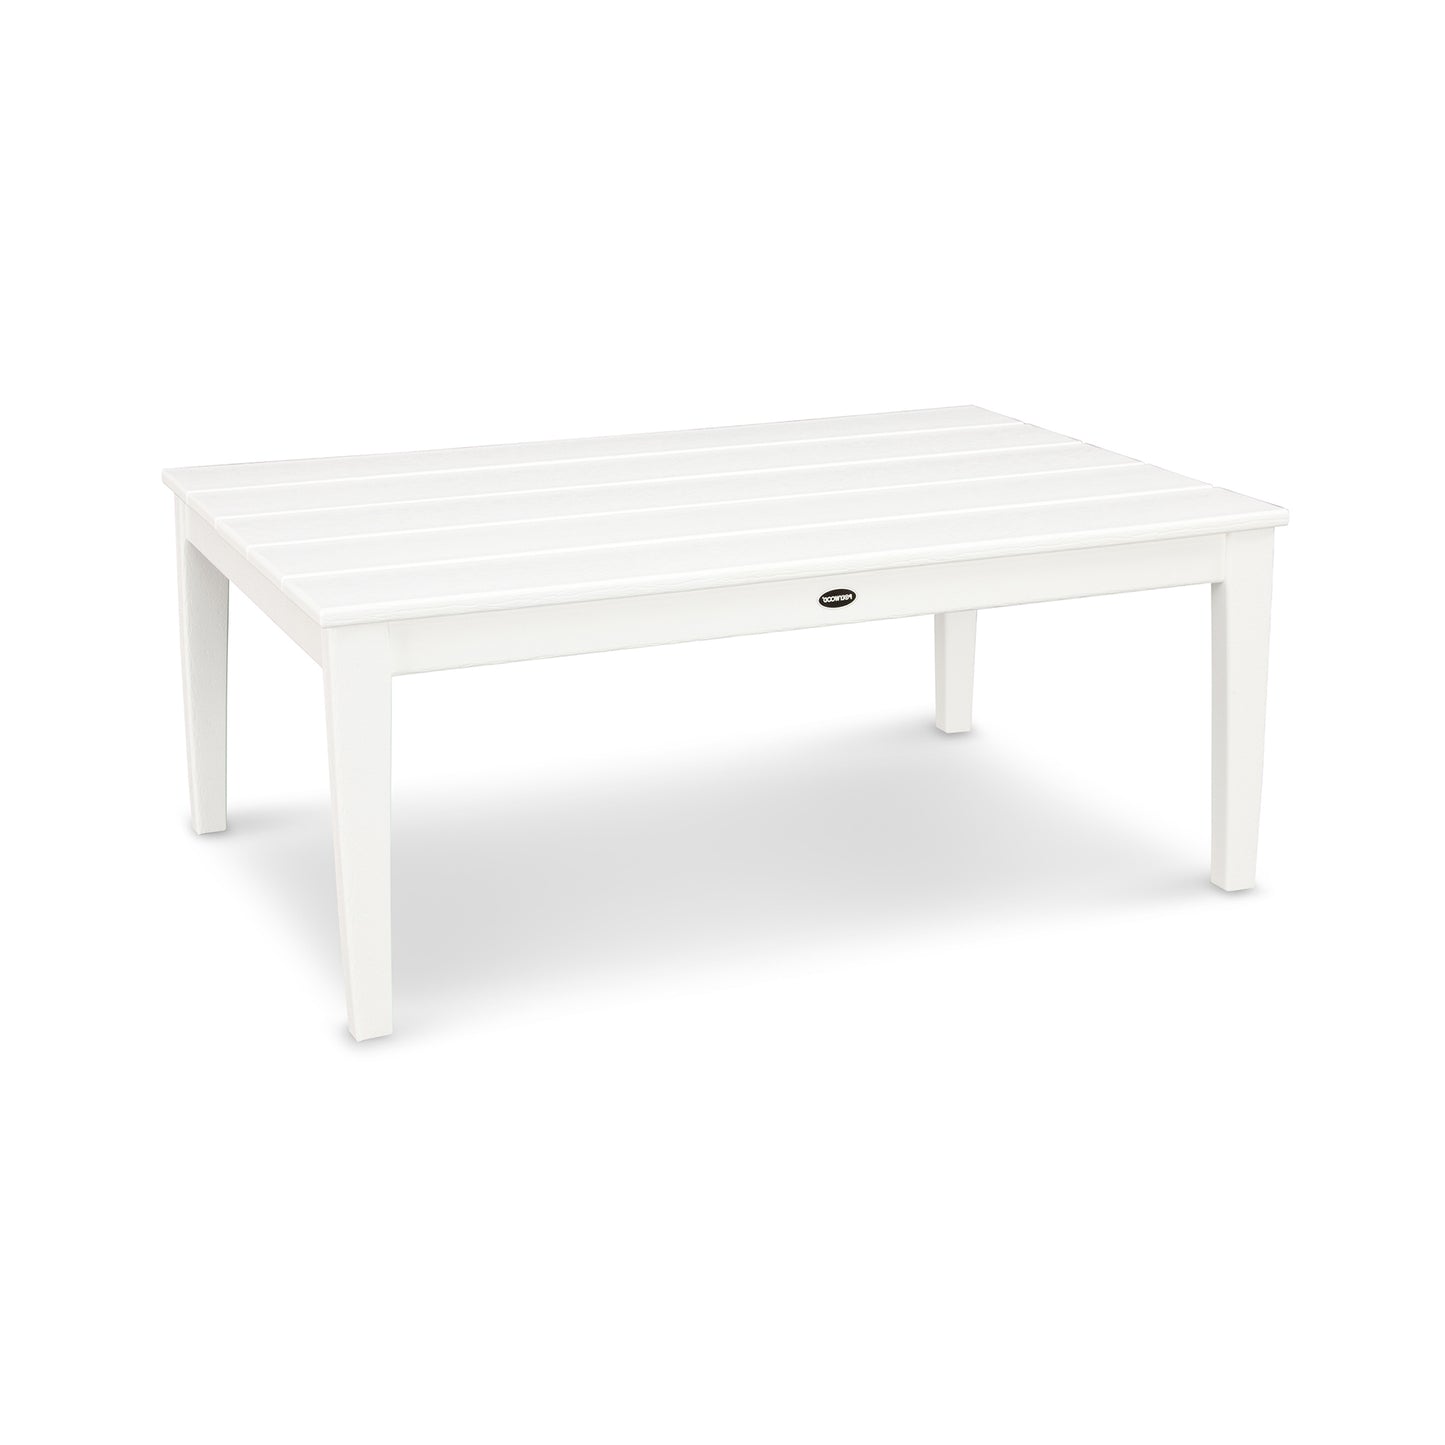 A simple white POLYWOOD Newport 28" x 42" coffee table with horizontal plank detailing on the top surface and four sturdy legs, isolated on a white background.